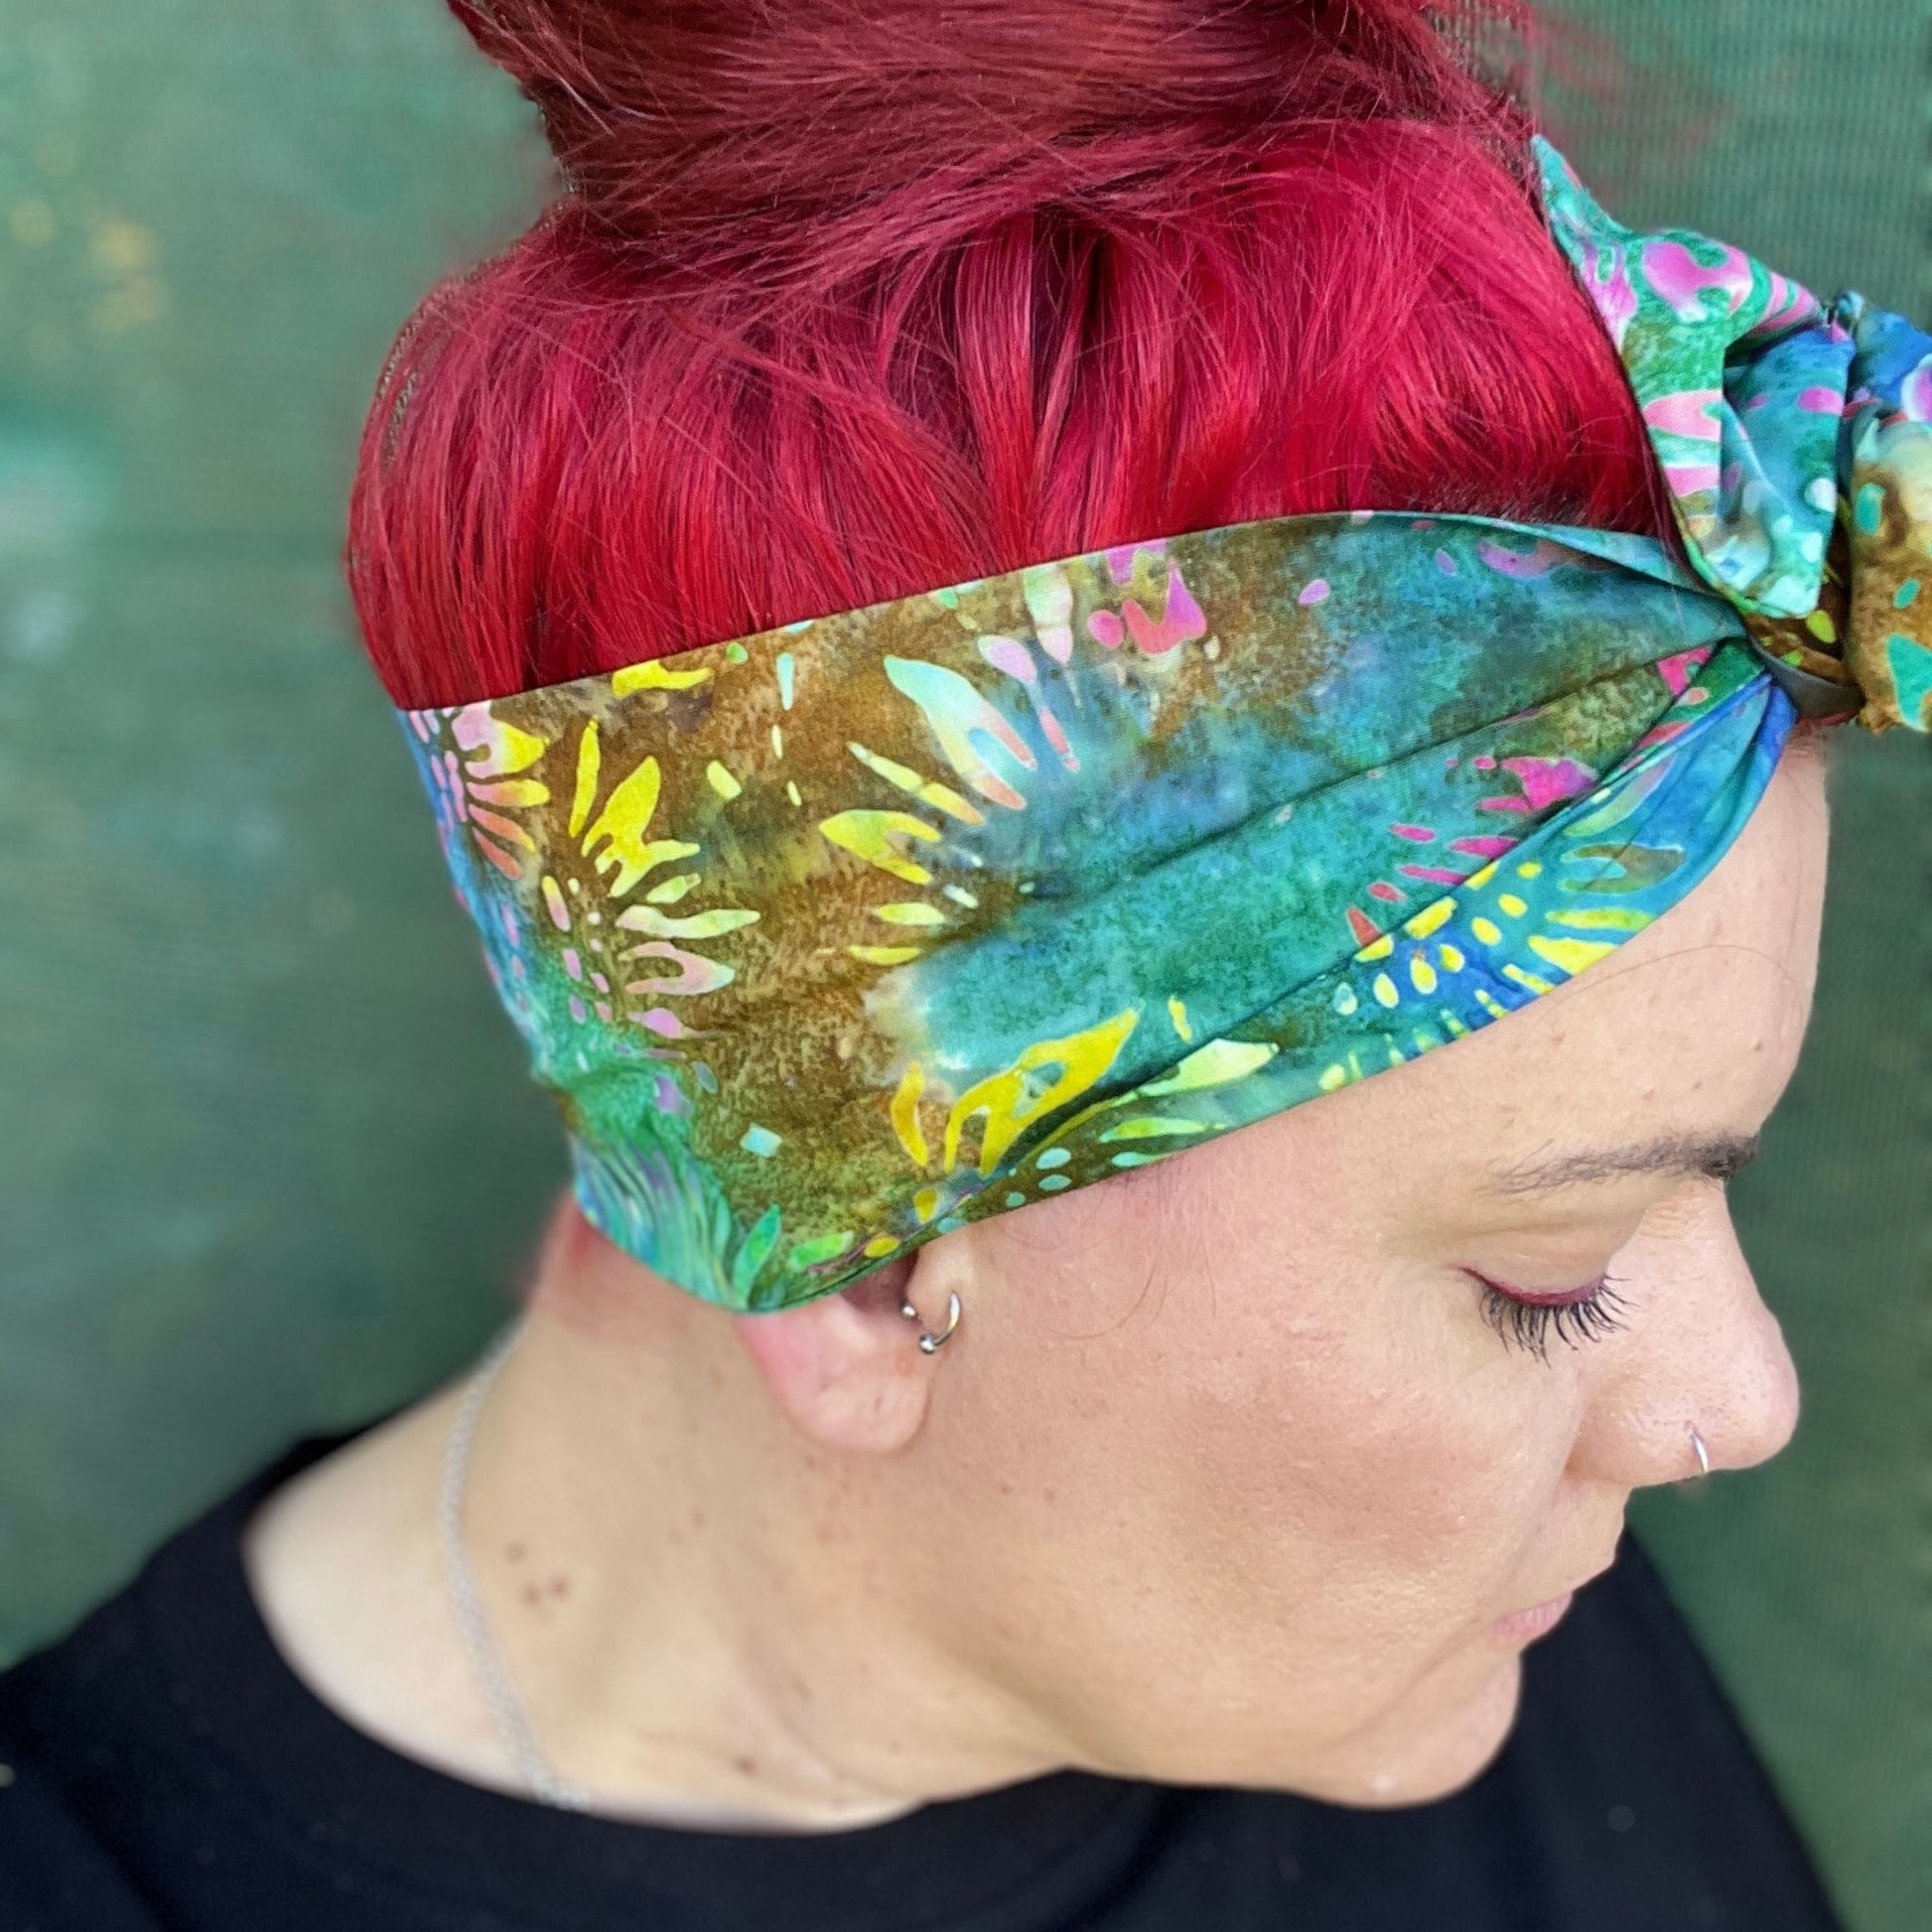 Palm Tie Dye Explore our exclusive collection of 100% adjustable headbands for women, crafted with care in Australia. Designed for style, comfort, and versatility, our headbands are perfect for any occasion. Embrace your unique look with our standout pieces. Discover your new favorite accessory today!